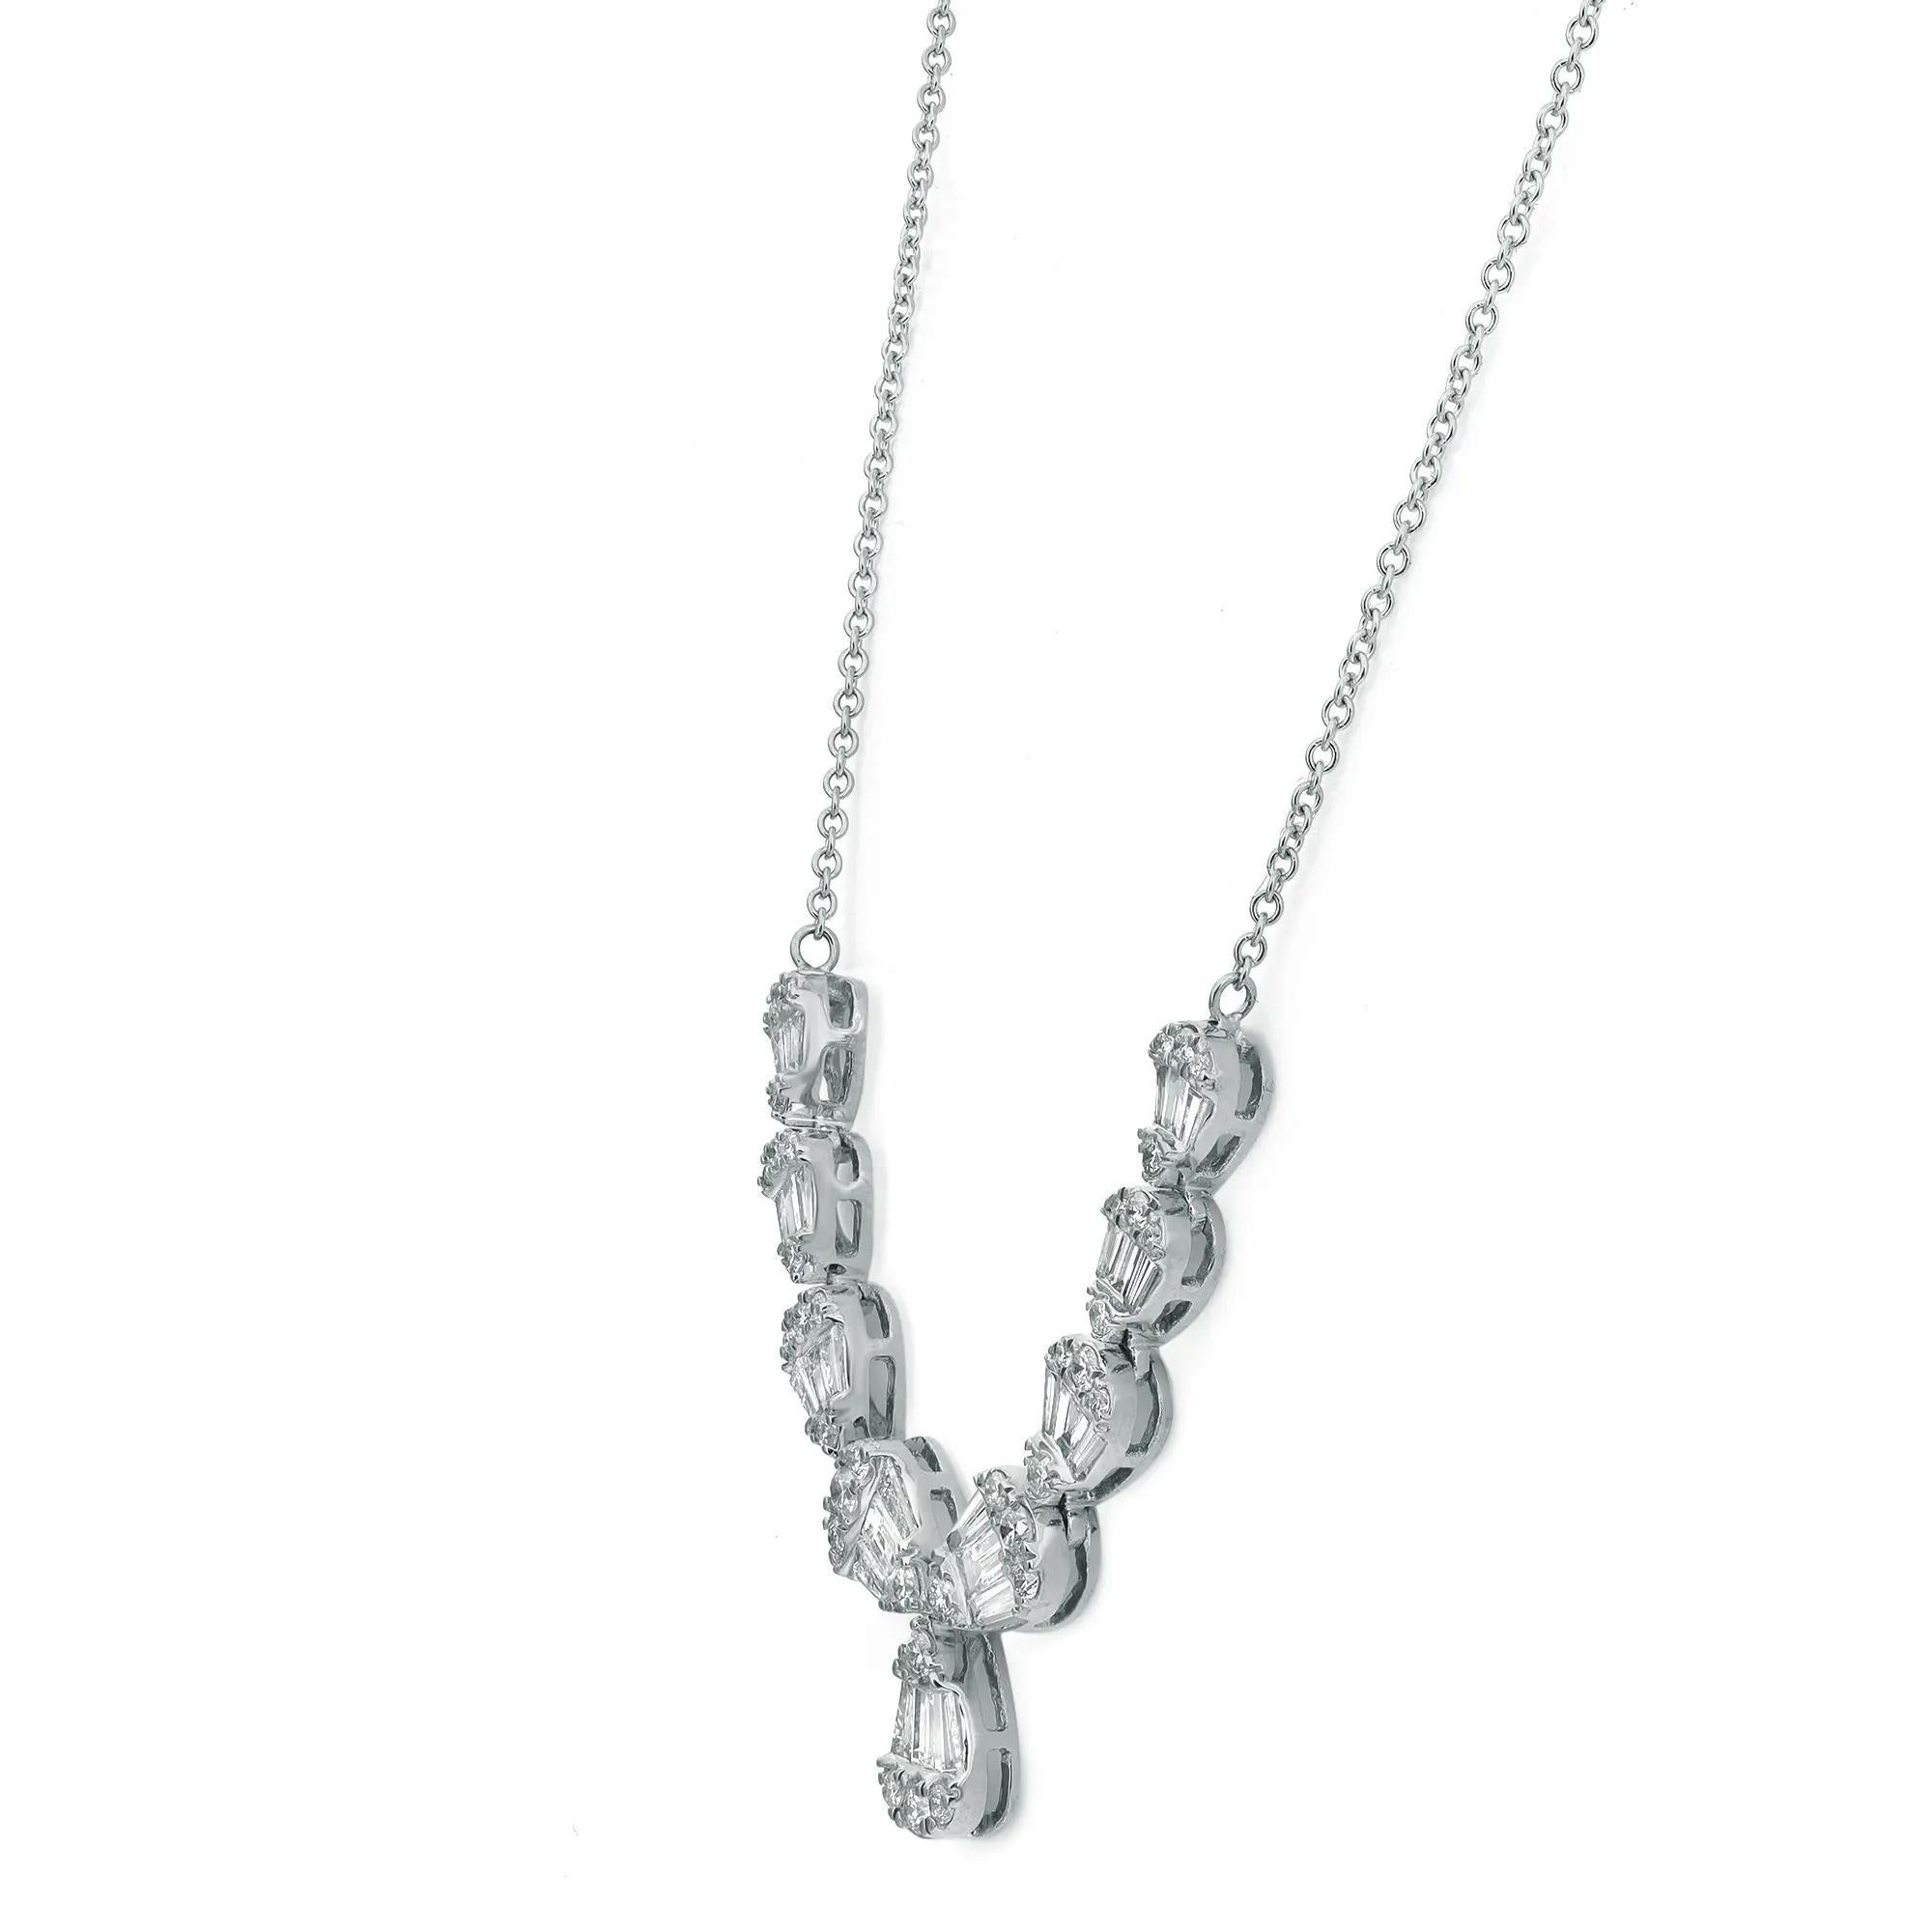 Bask in brilliance with this alluring diamond bar drop necklace. Crafted in 14K white gold, this necklace features nine pear shaped shanks in graduation, studded with channel set baguette cut and prong set round brilliant cut diamonds. Total diamond